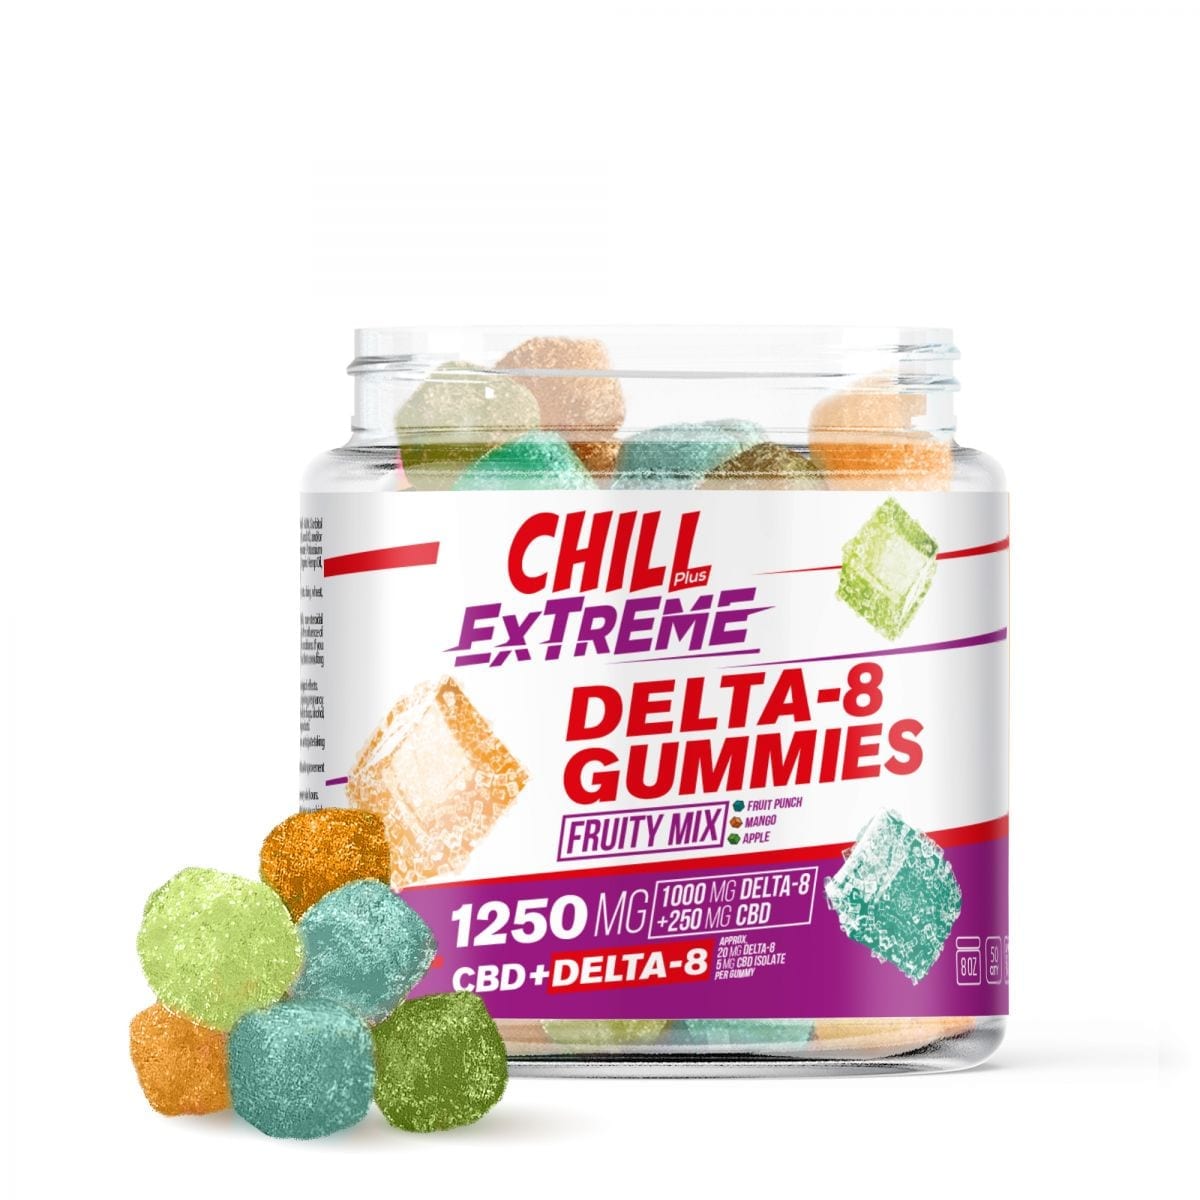 Chill Extreme Delta 8 Gummies Fruity Mix yoga smokes yoga studio, delivery, delivery near me, yoga smokes smoke shop, find smoke shop, head shop near me, yoga studio, headshop, head shop, local smoke shop, psl, psl smoke shop, smoke shop, smokeshop, yoga, yoga studio, dispensary, local dispensary, smokeshop near me, port saint lucie, florida, port st lucie, lounge, life, highlife, love, stoned, highsociety. Yoga Smokes